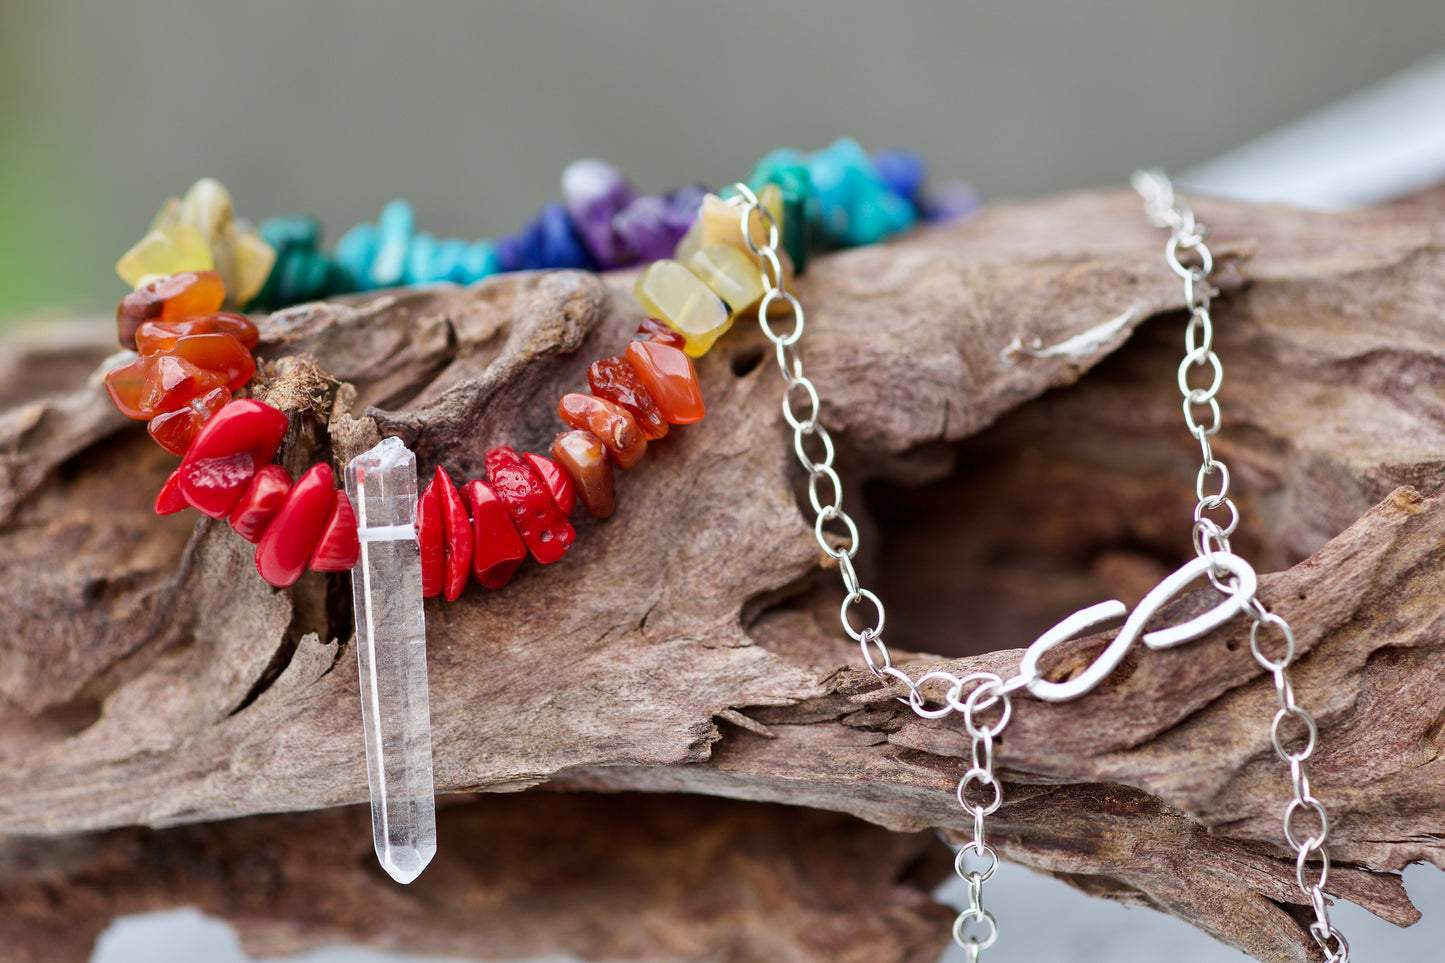 Rainbow / Pride / Chakra Stones, Clear Quartz Dow Crystal, and Sterling Silver Adjustable Length Necklace